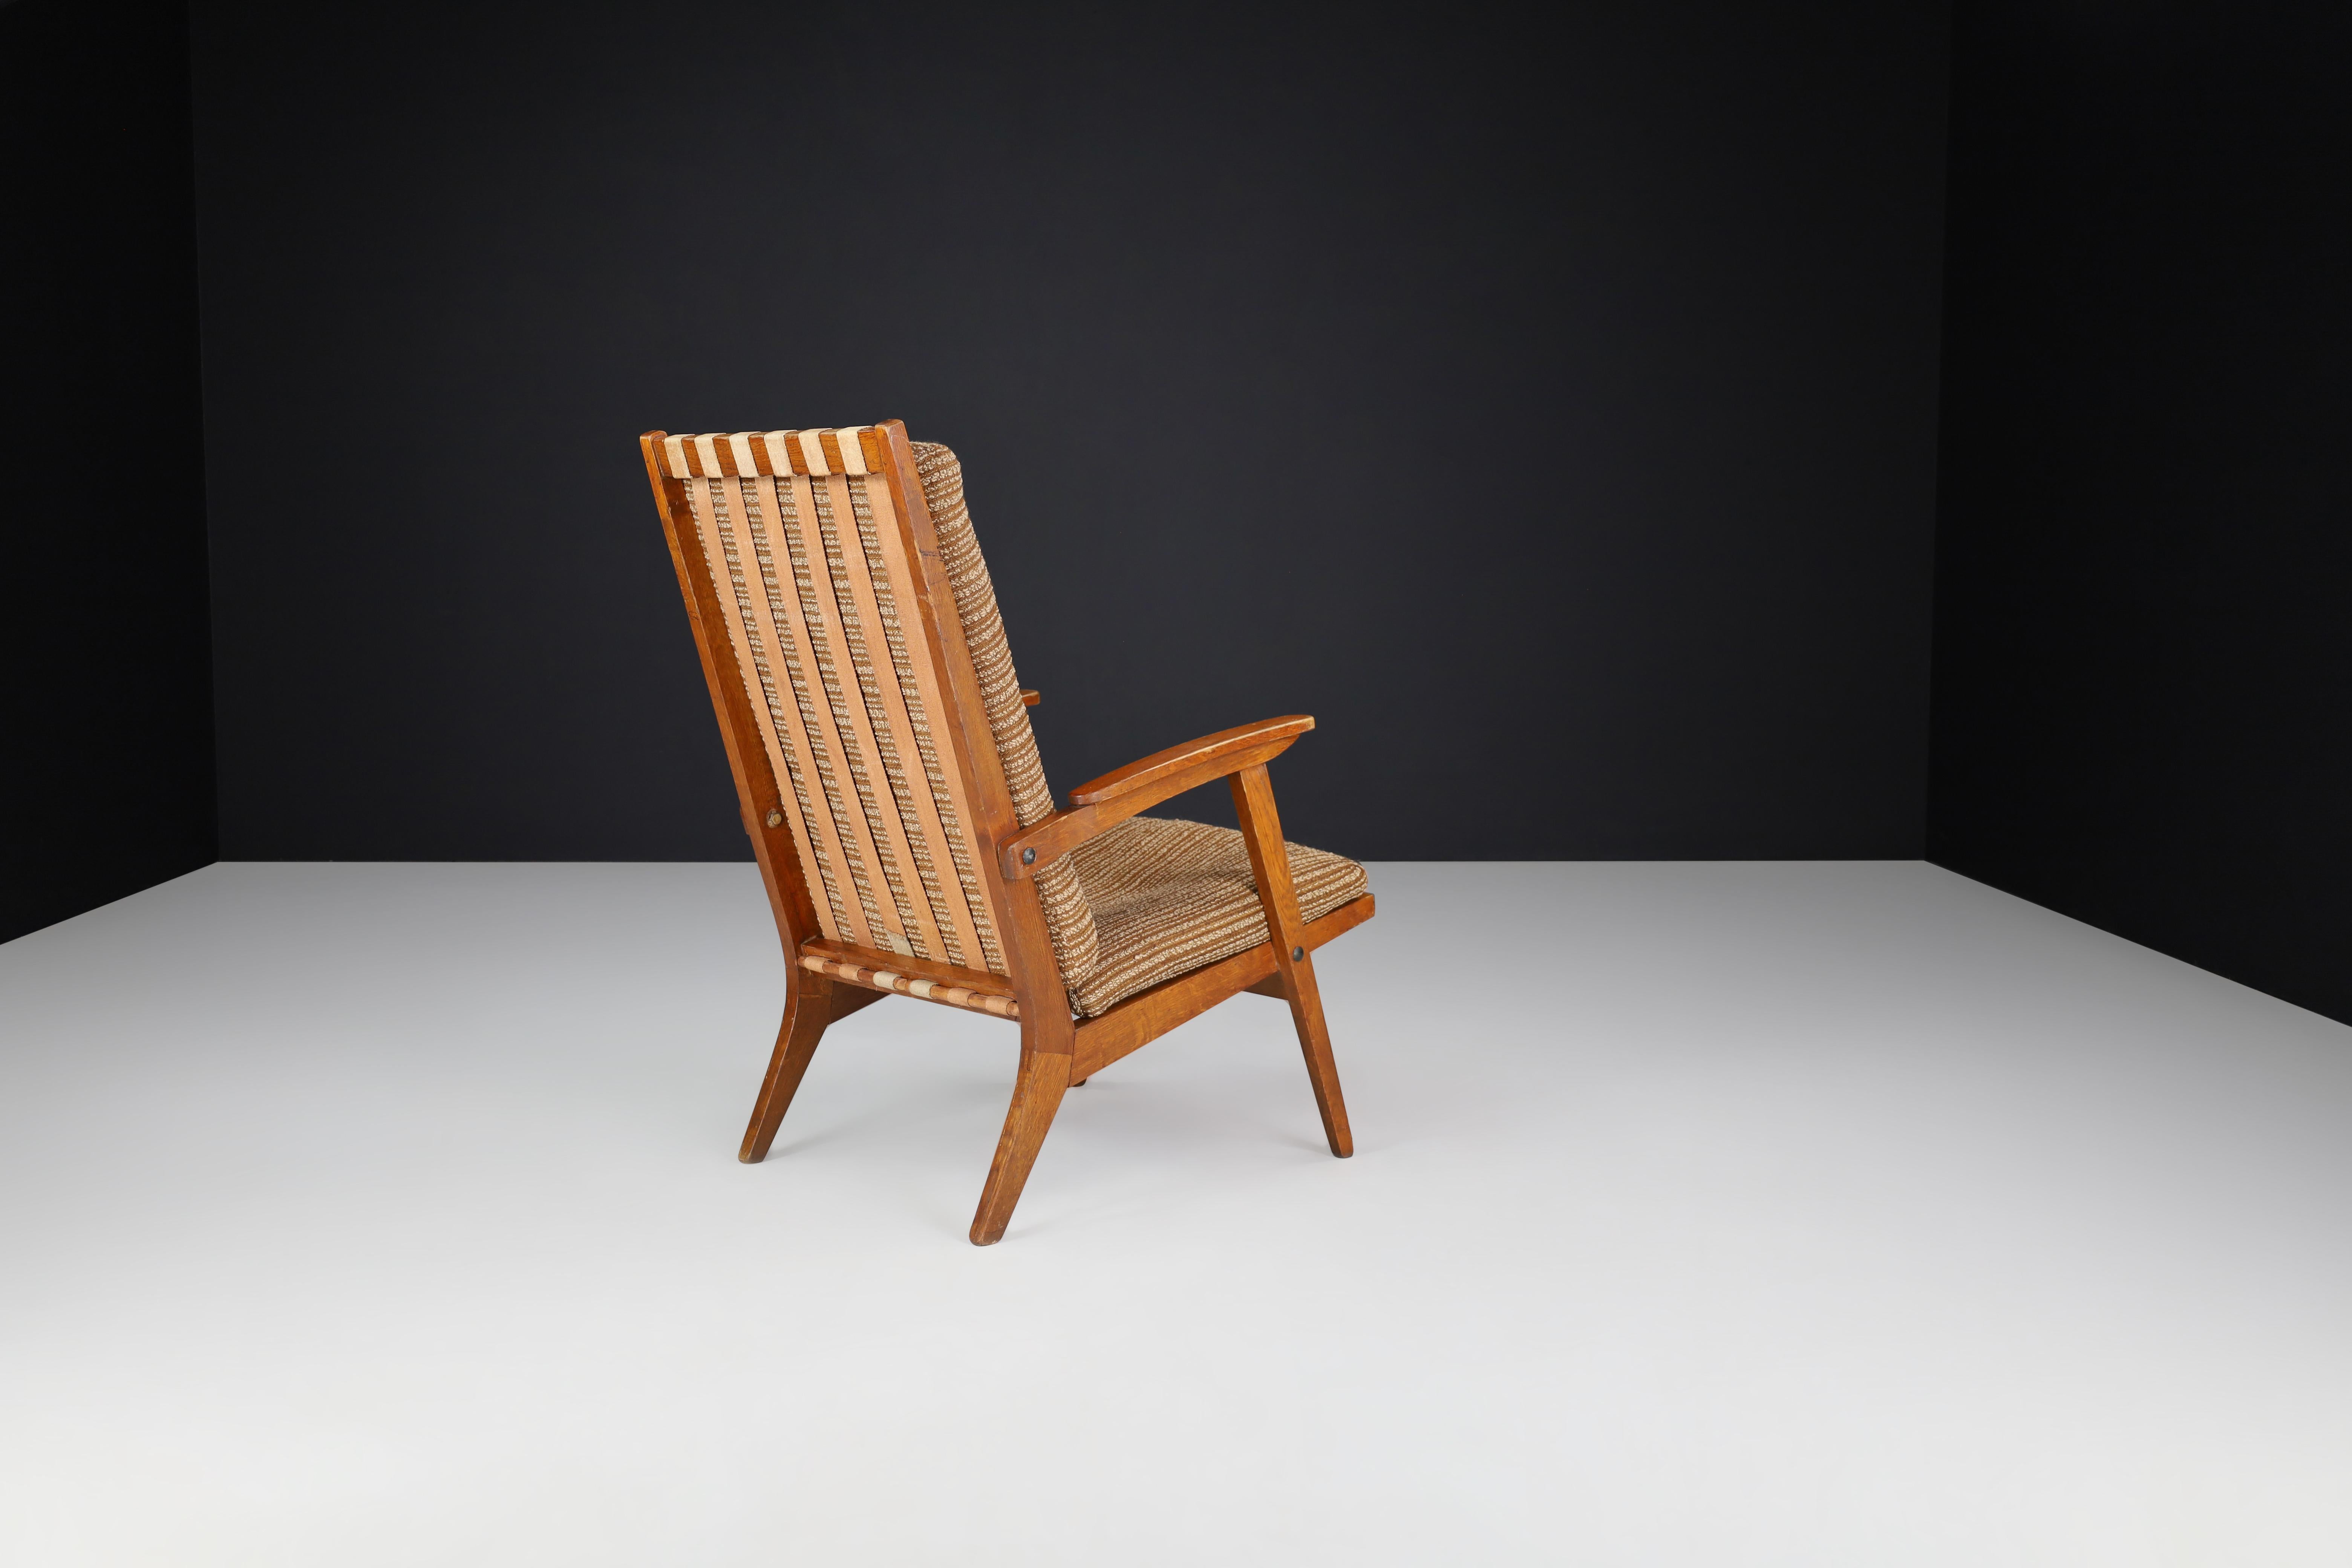 Oak Sculptural Lounge Chairs with Brown Upholstery, France, 1950s For Sale 5